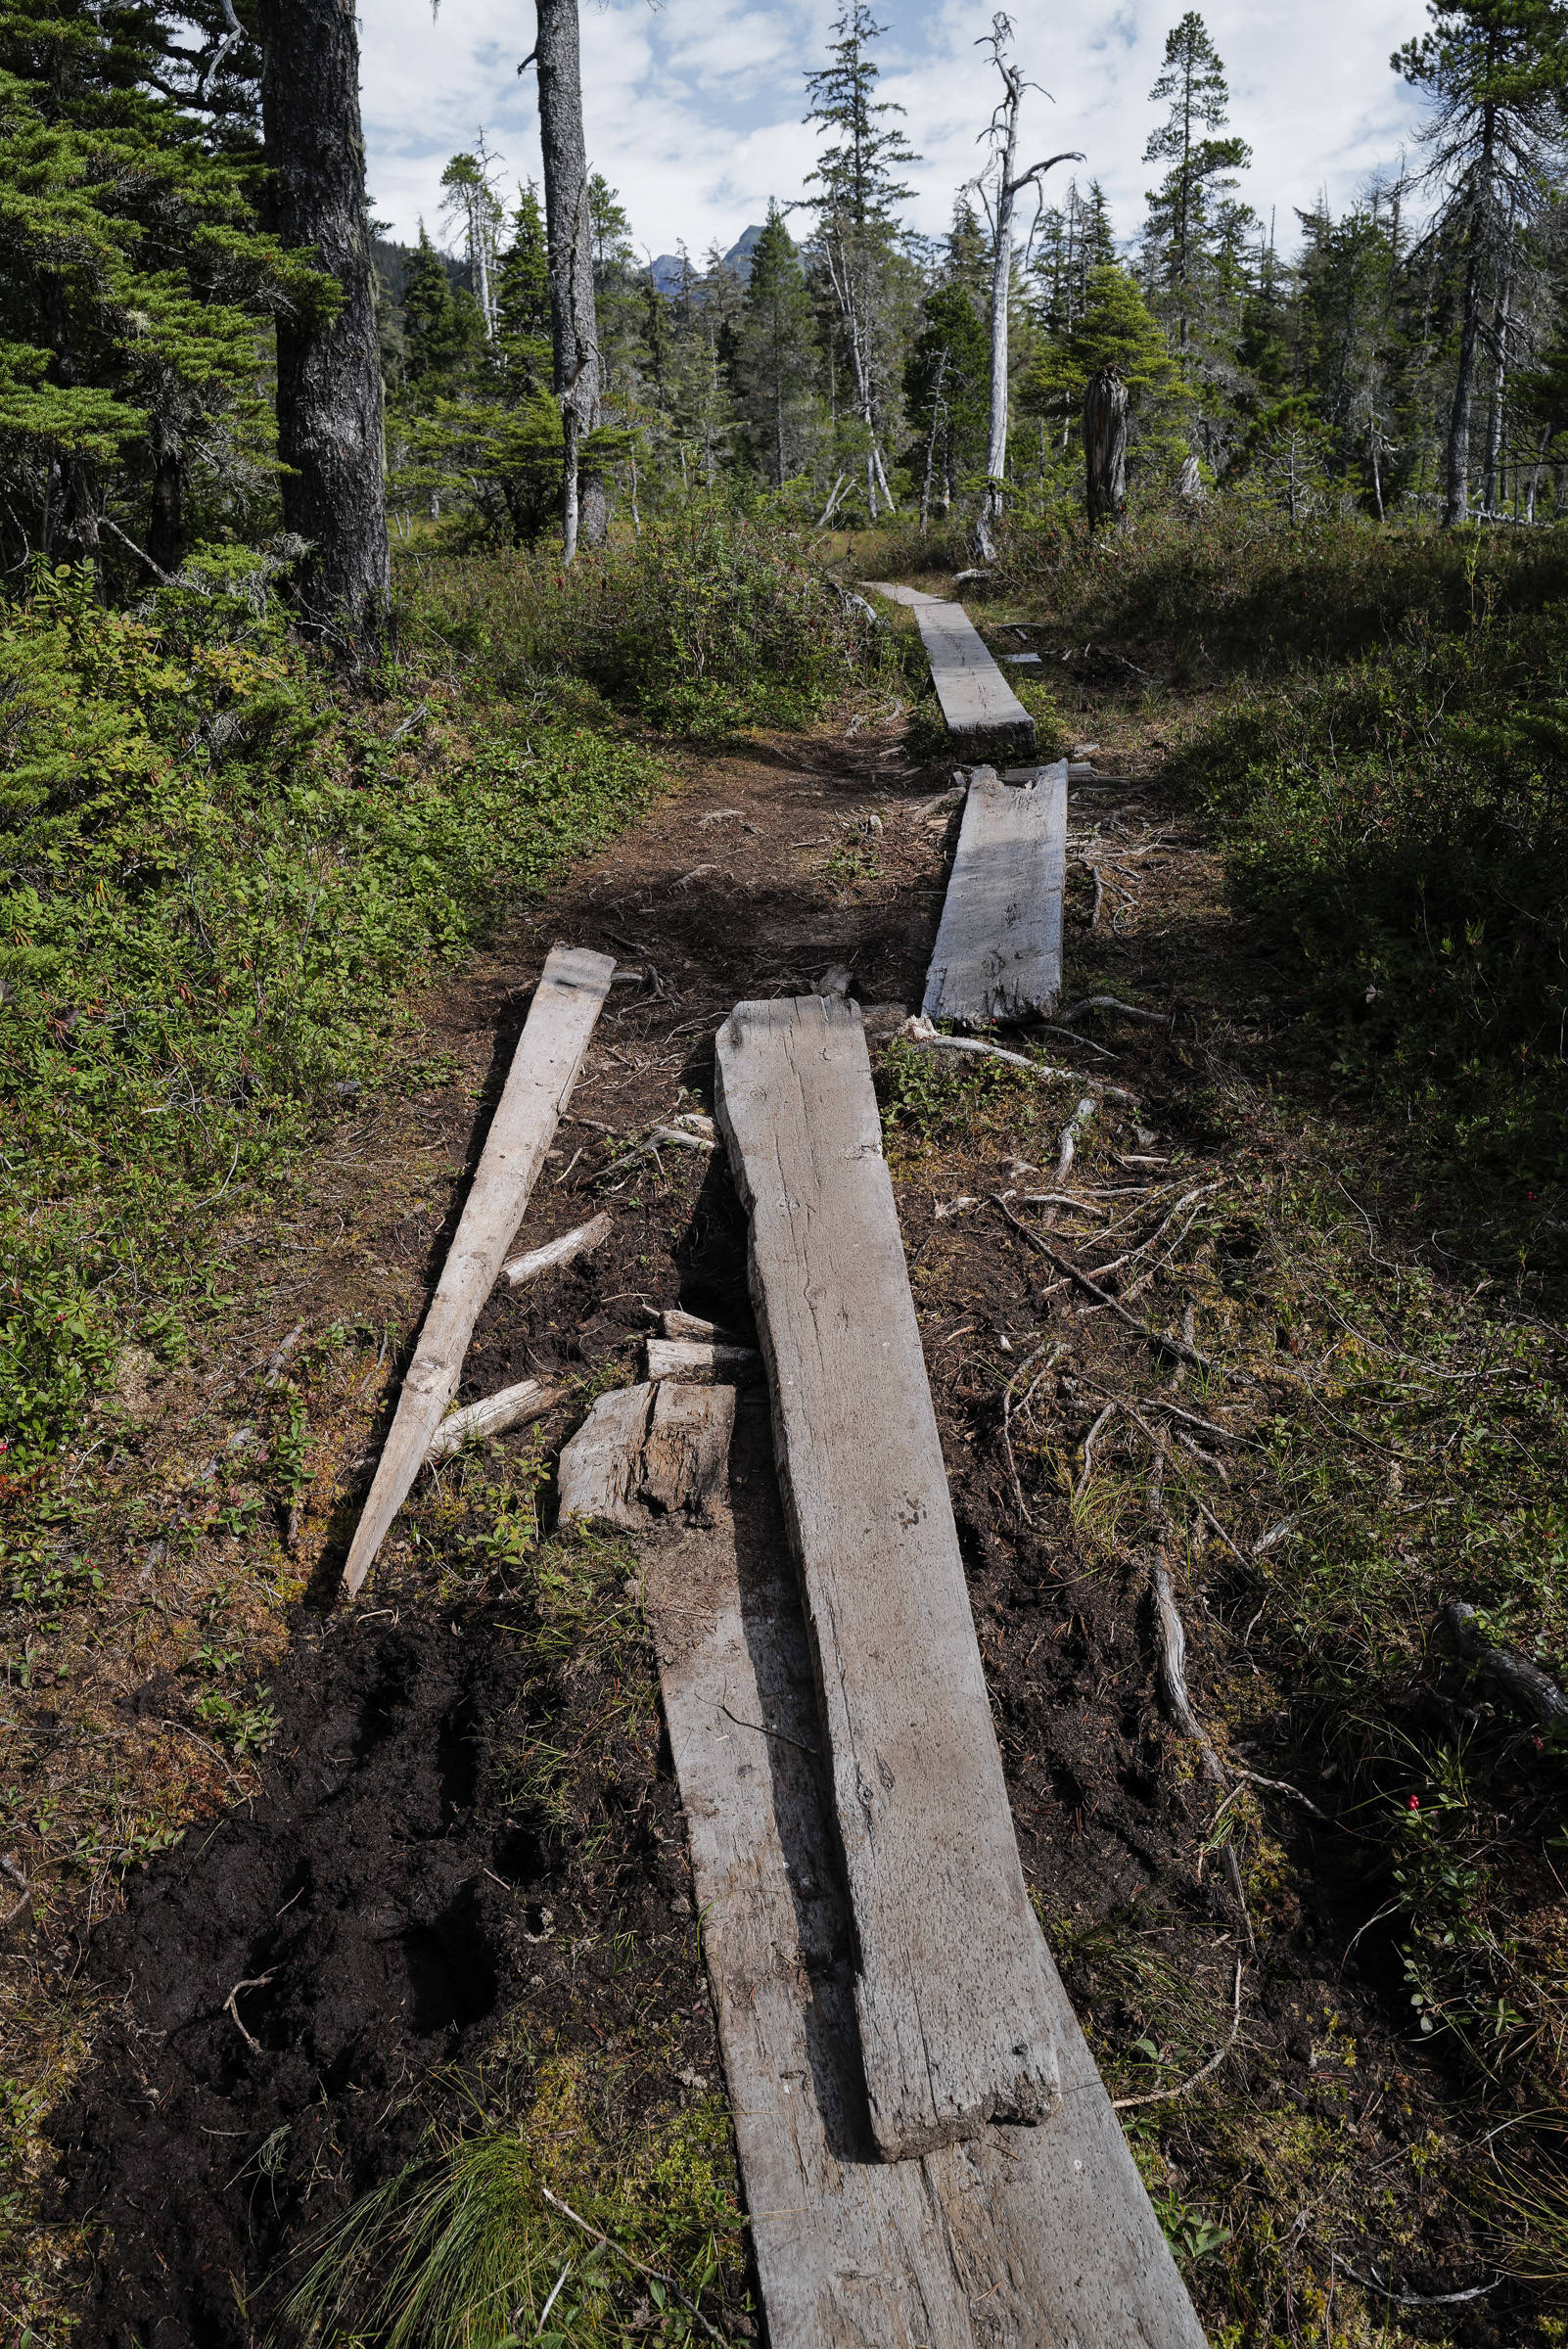 Boards on the Auke Nu Trail have fallen in to disrepair on Wednesday, Aug. 7, 2019. The U.S. Forest Service is repairing sections of the trail on a yearly basis. (Michael Penn | Juneau Empire)